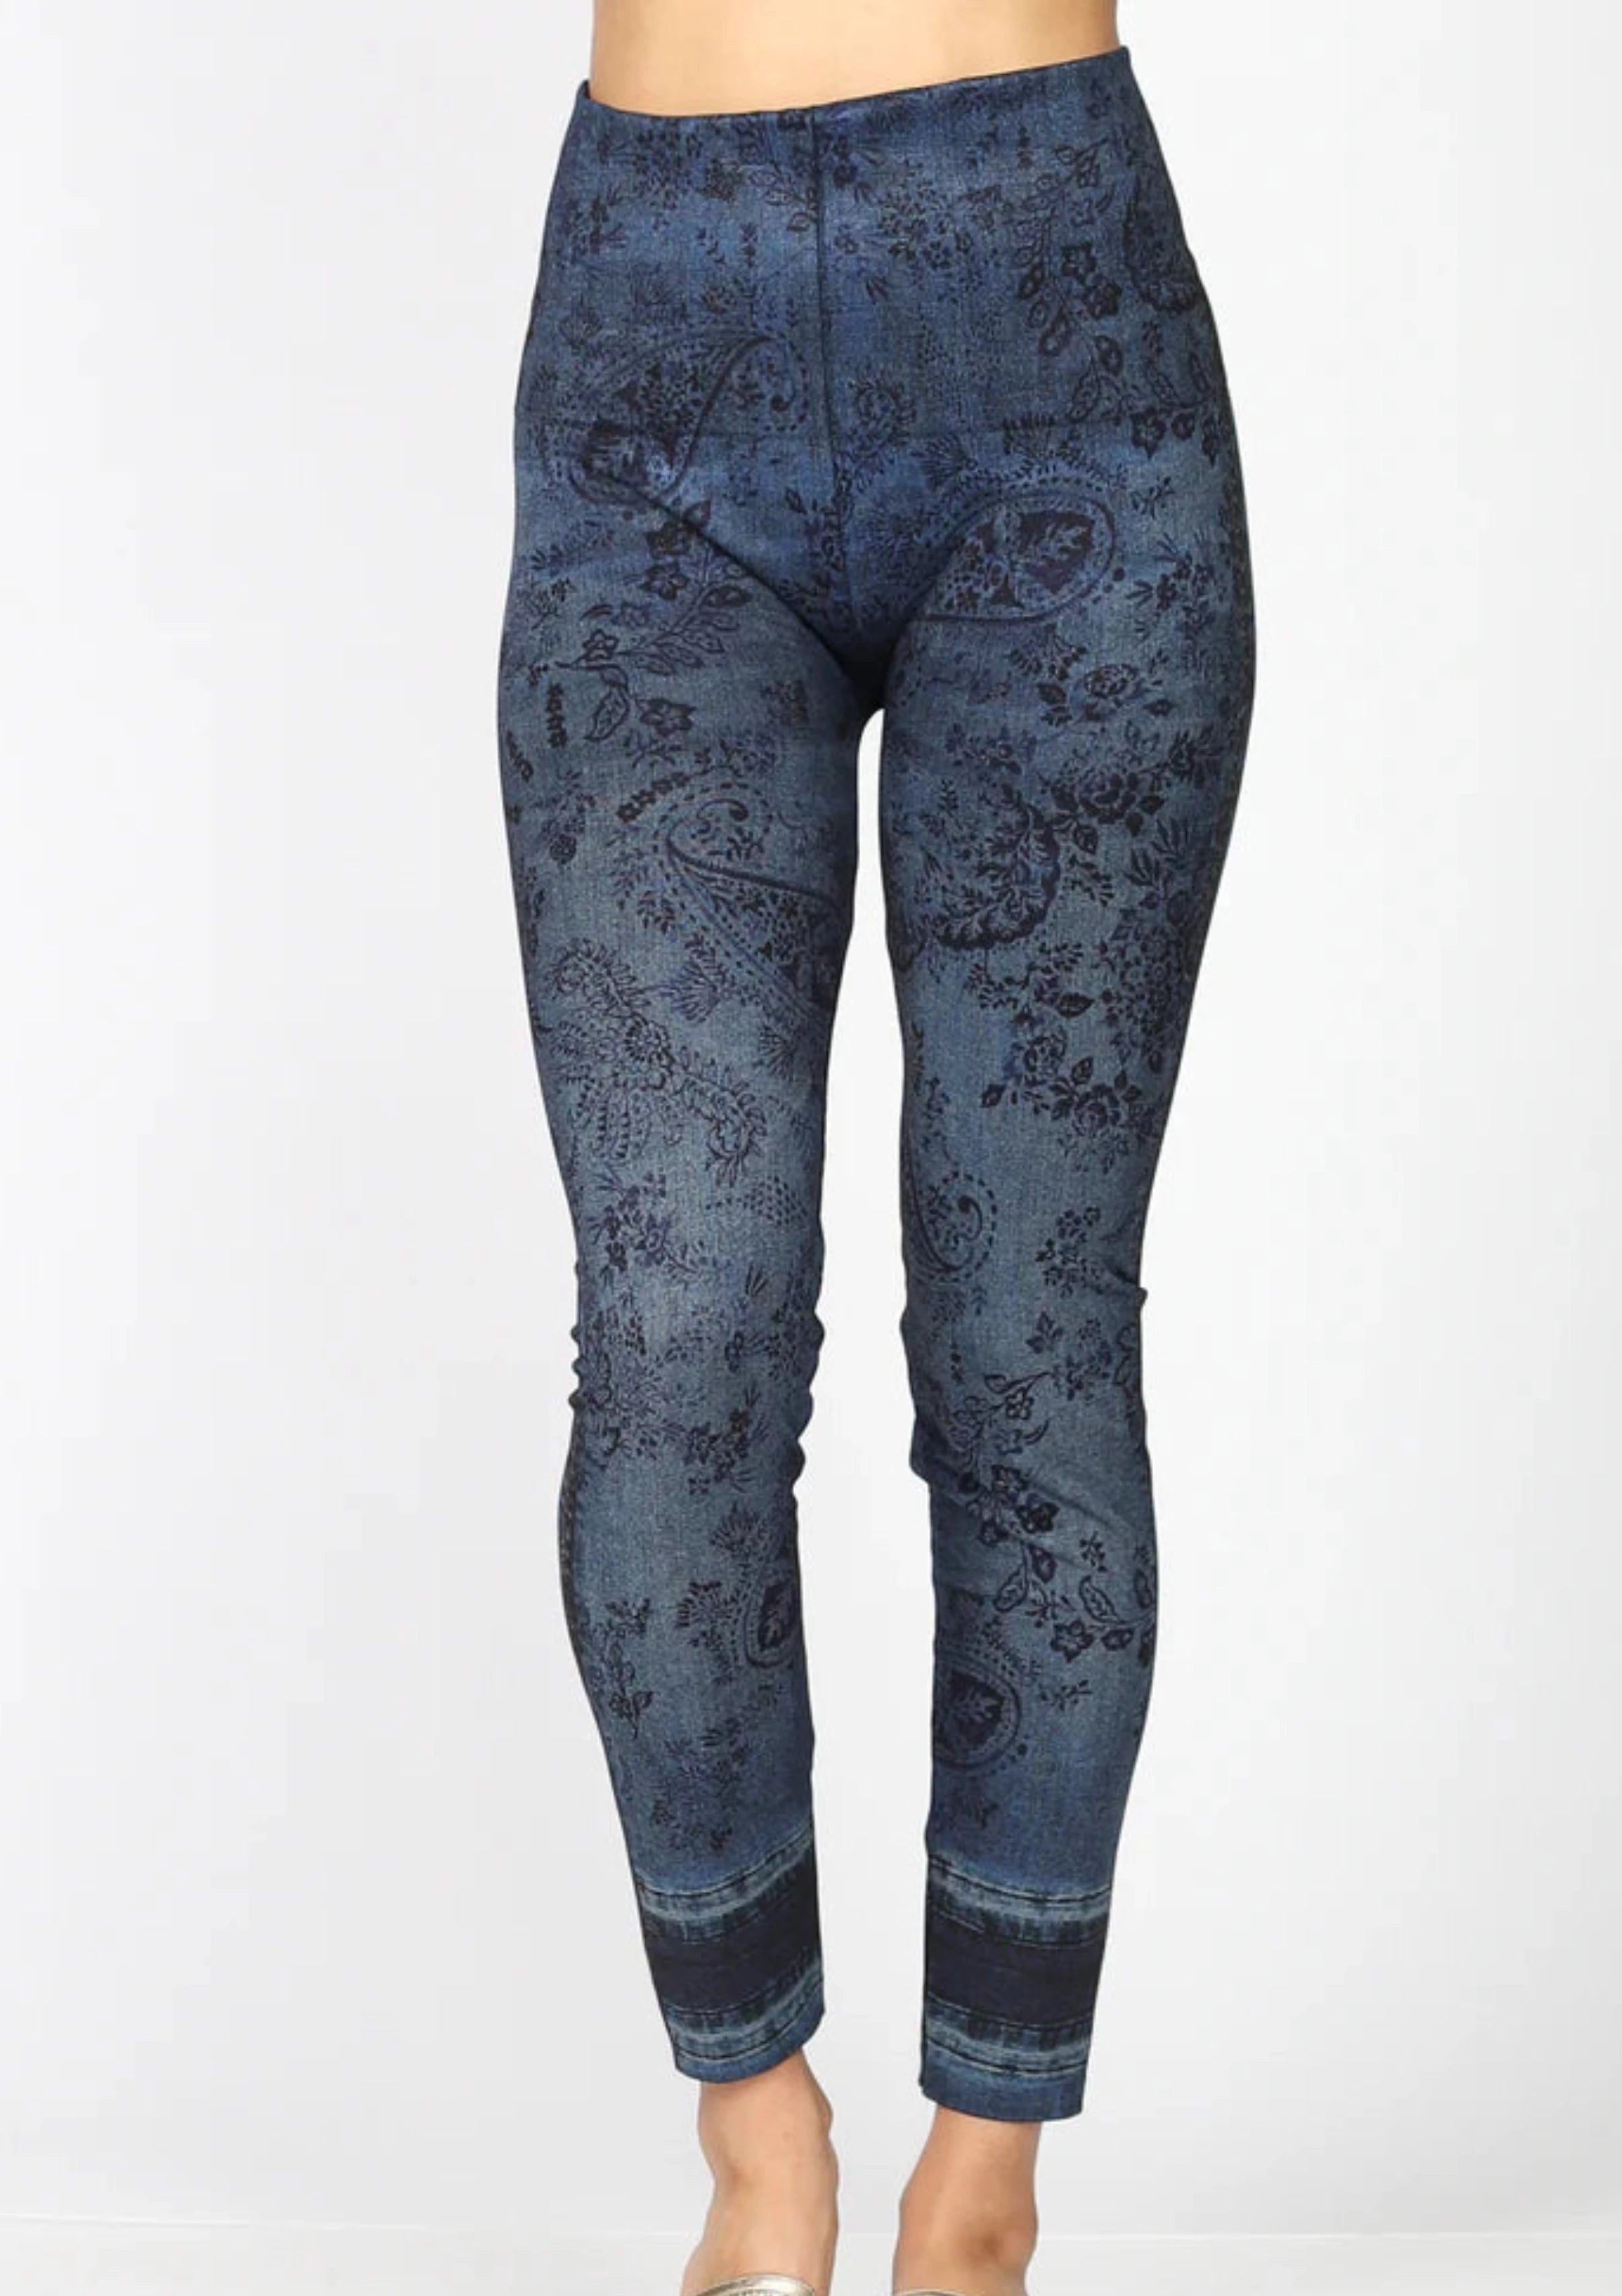 M. Rena - Women's Seamless Leggings and Knits - – Post Office by Shannon  Passero